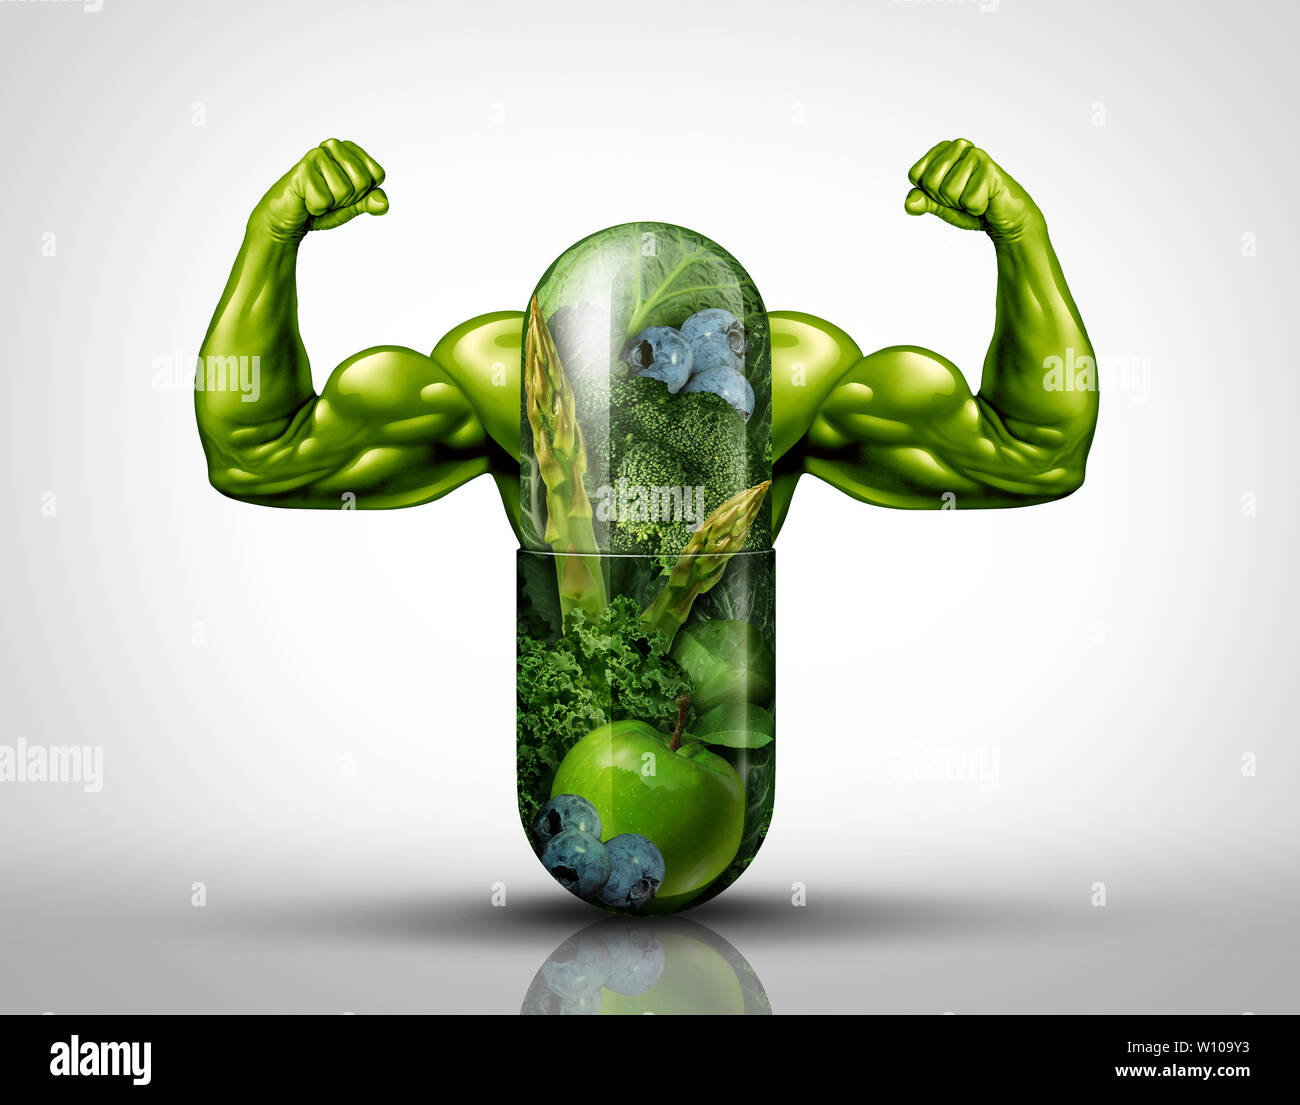 Power food supplement concept as a giant pill or medicine capsule with fresh fruit and vegetables inside on a table place setting as a nutrition. Stock Photo